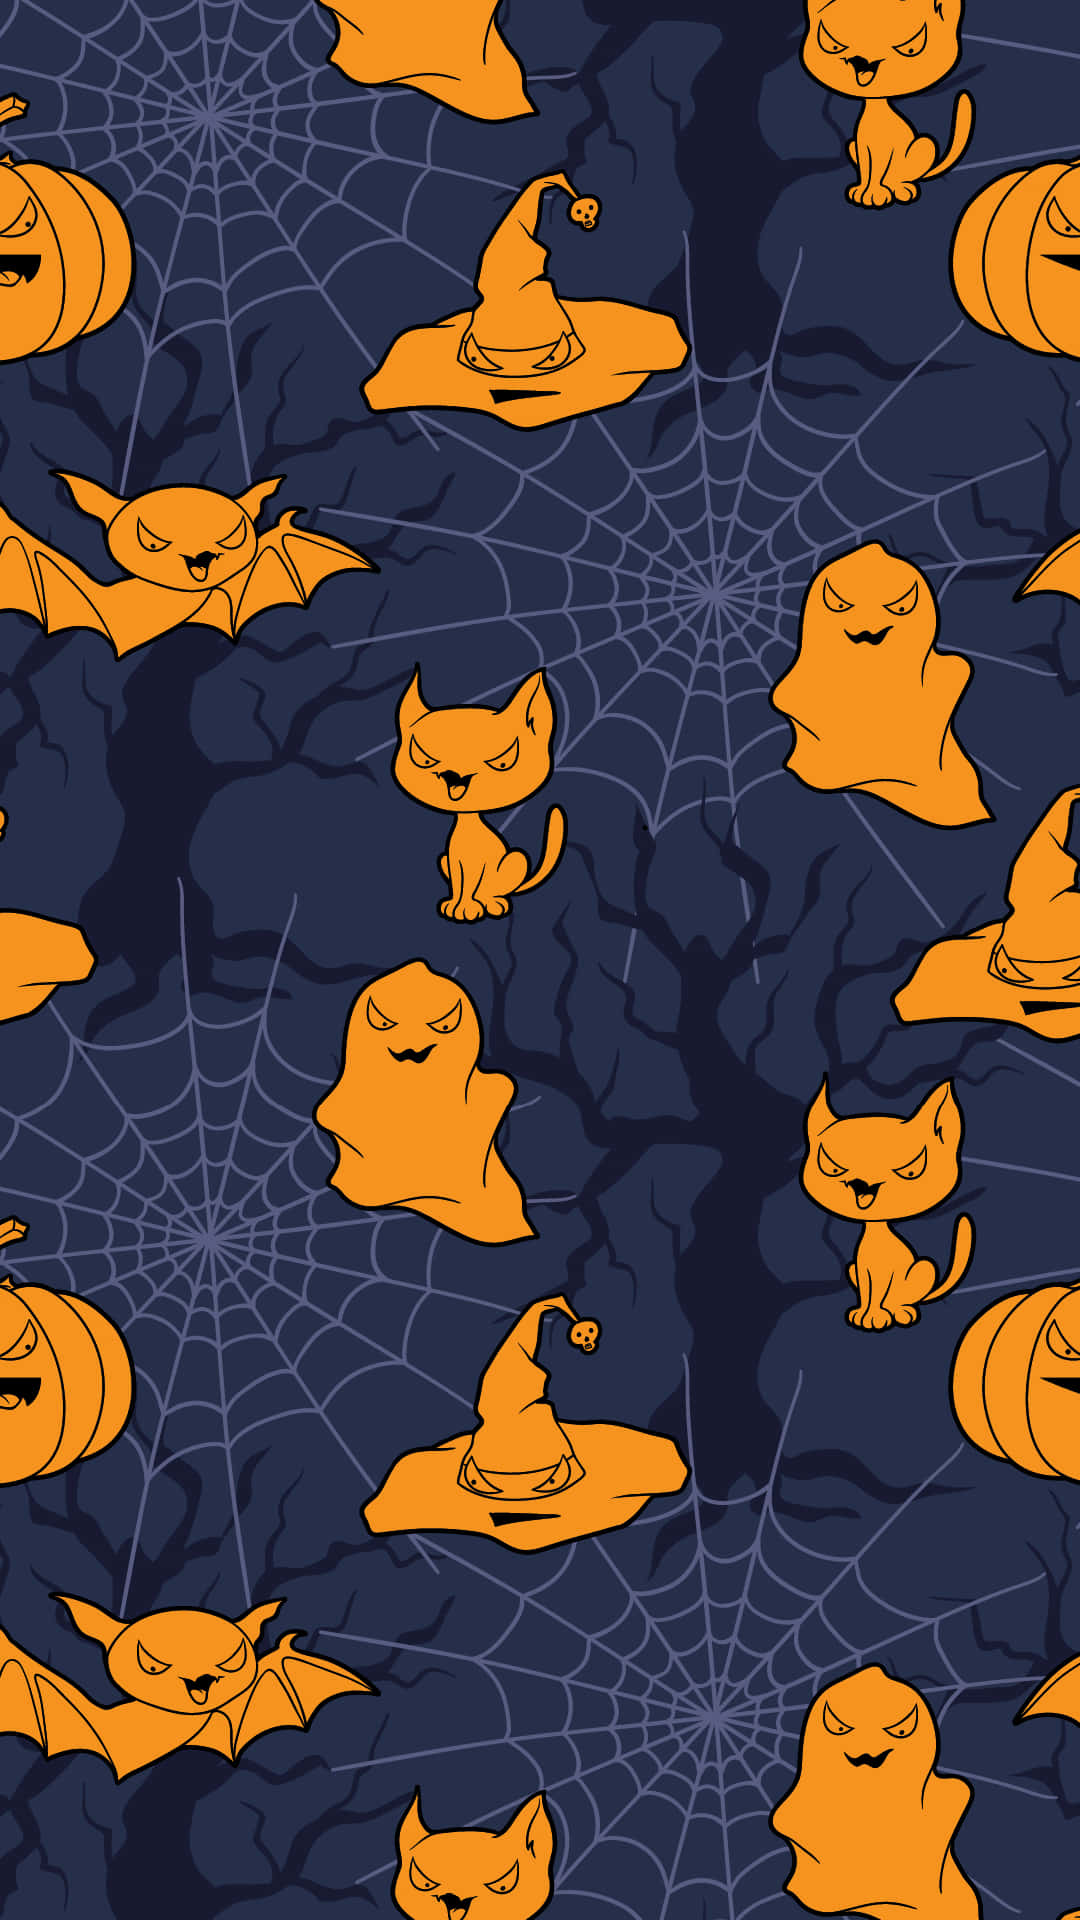 Get spooky with this festive iPhone cute Halloween wallpaper!